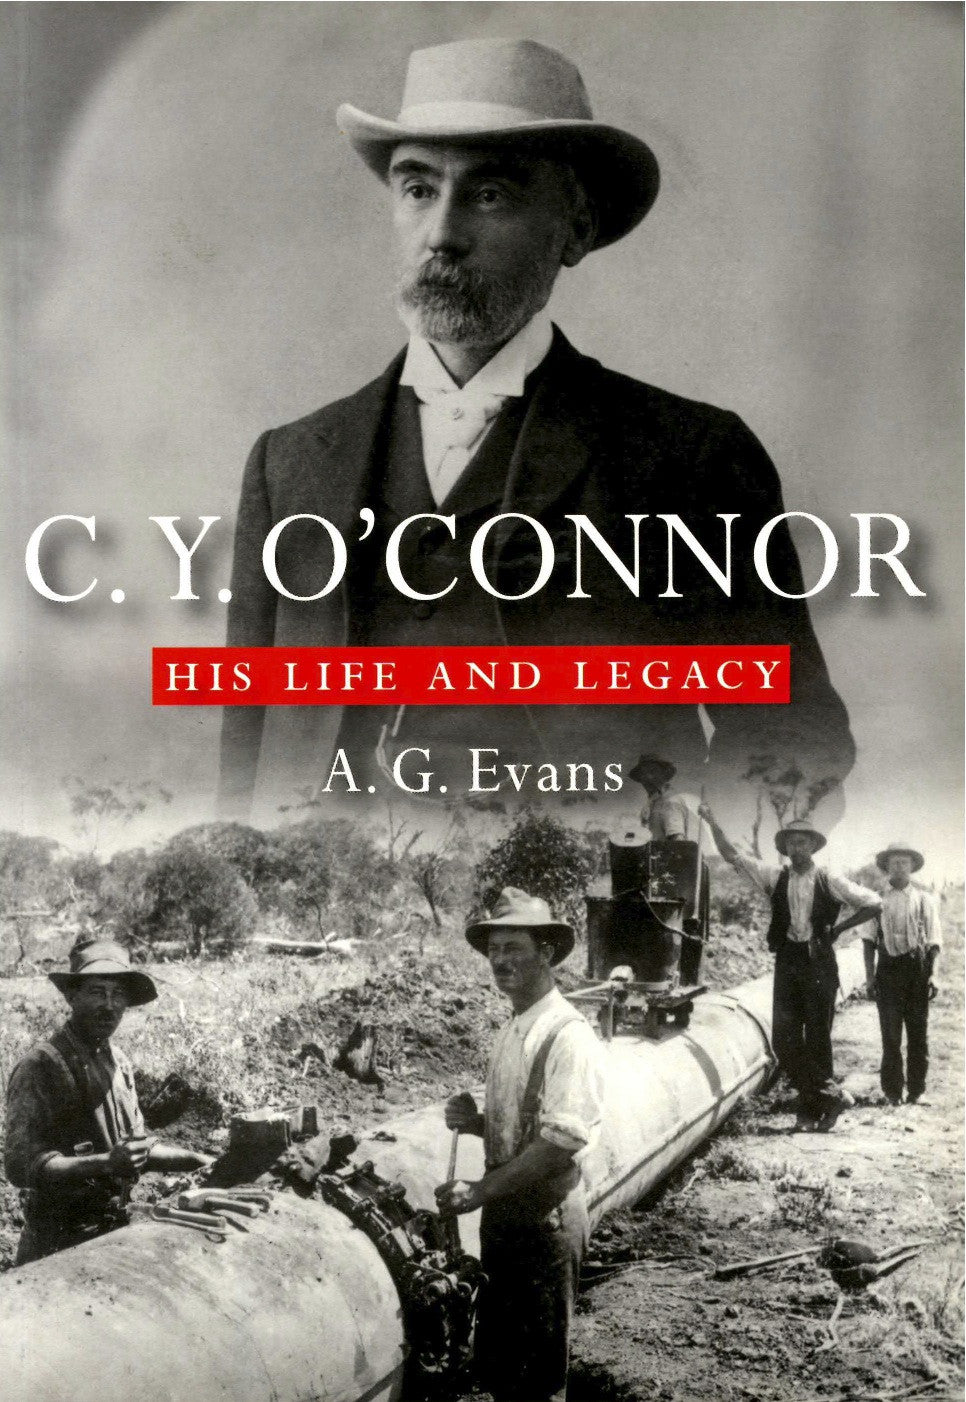 C. Y. O'Connor: His Life and Legacy